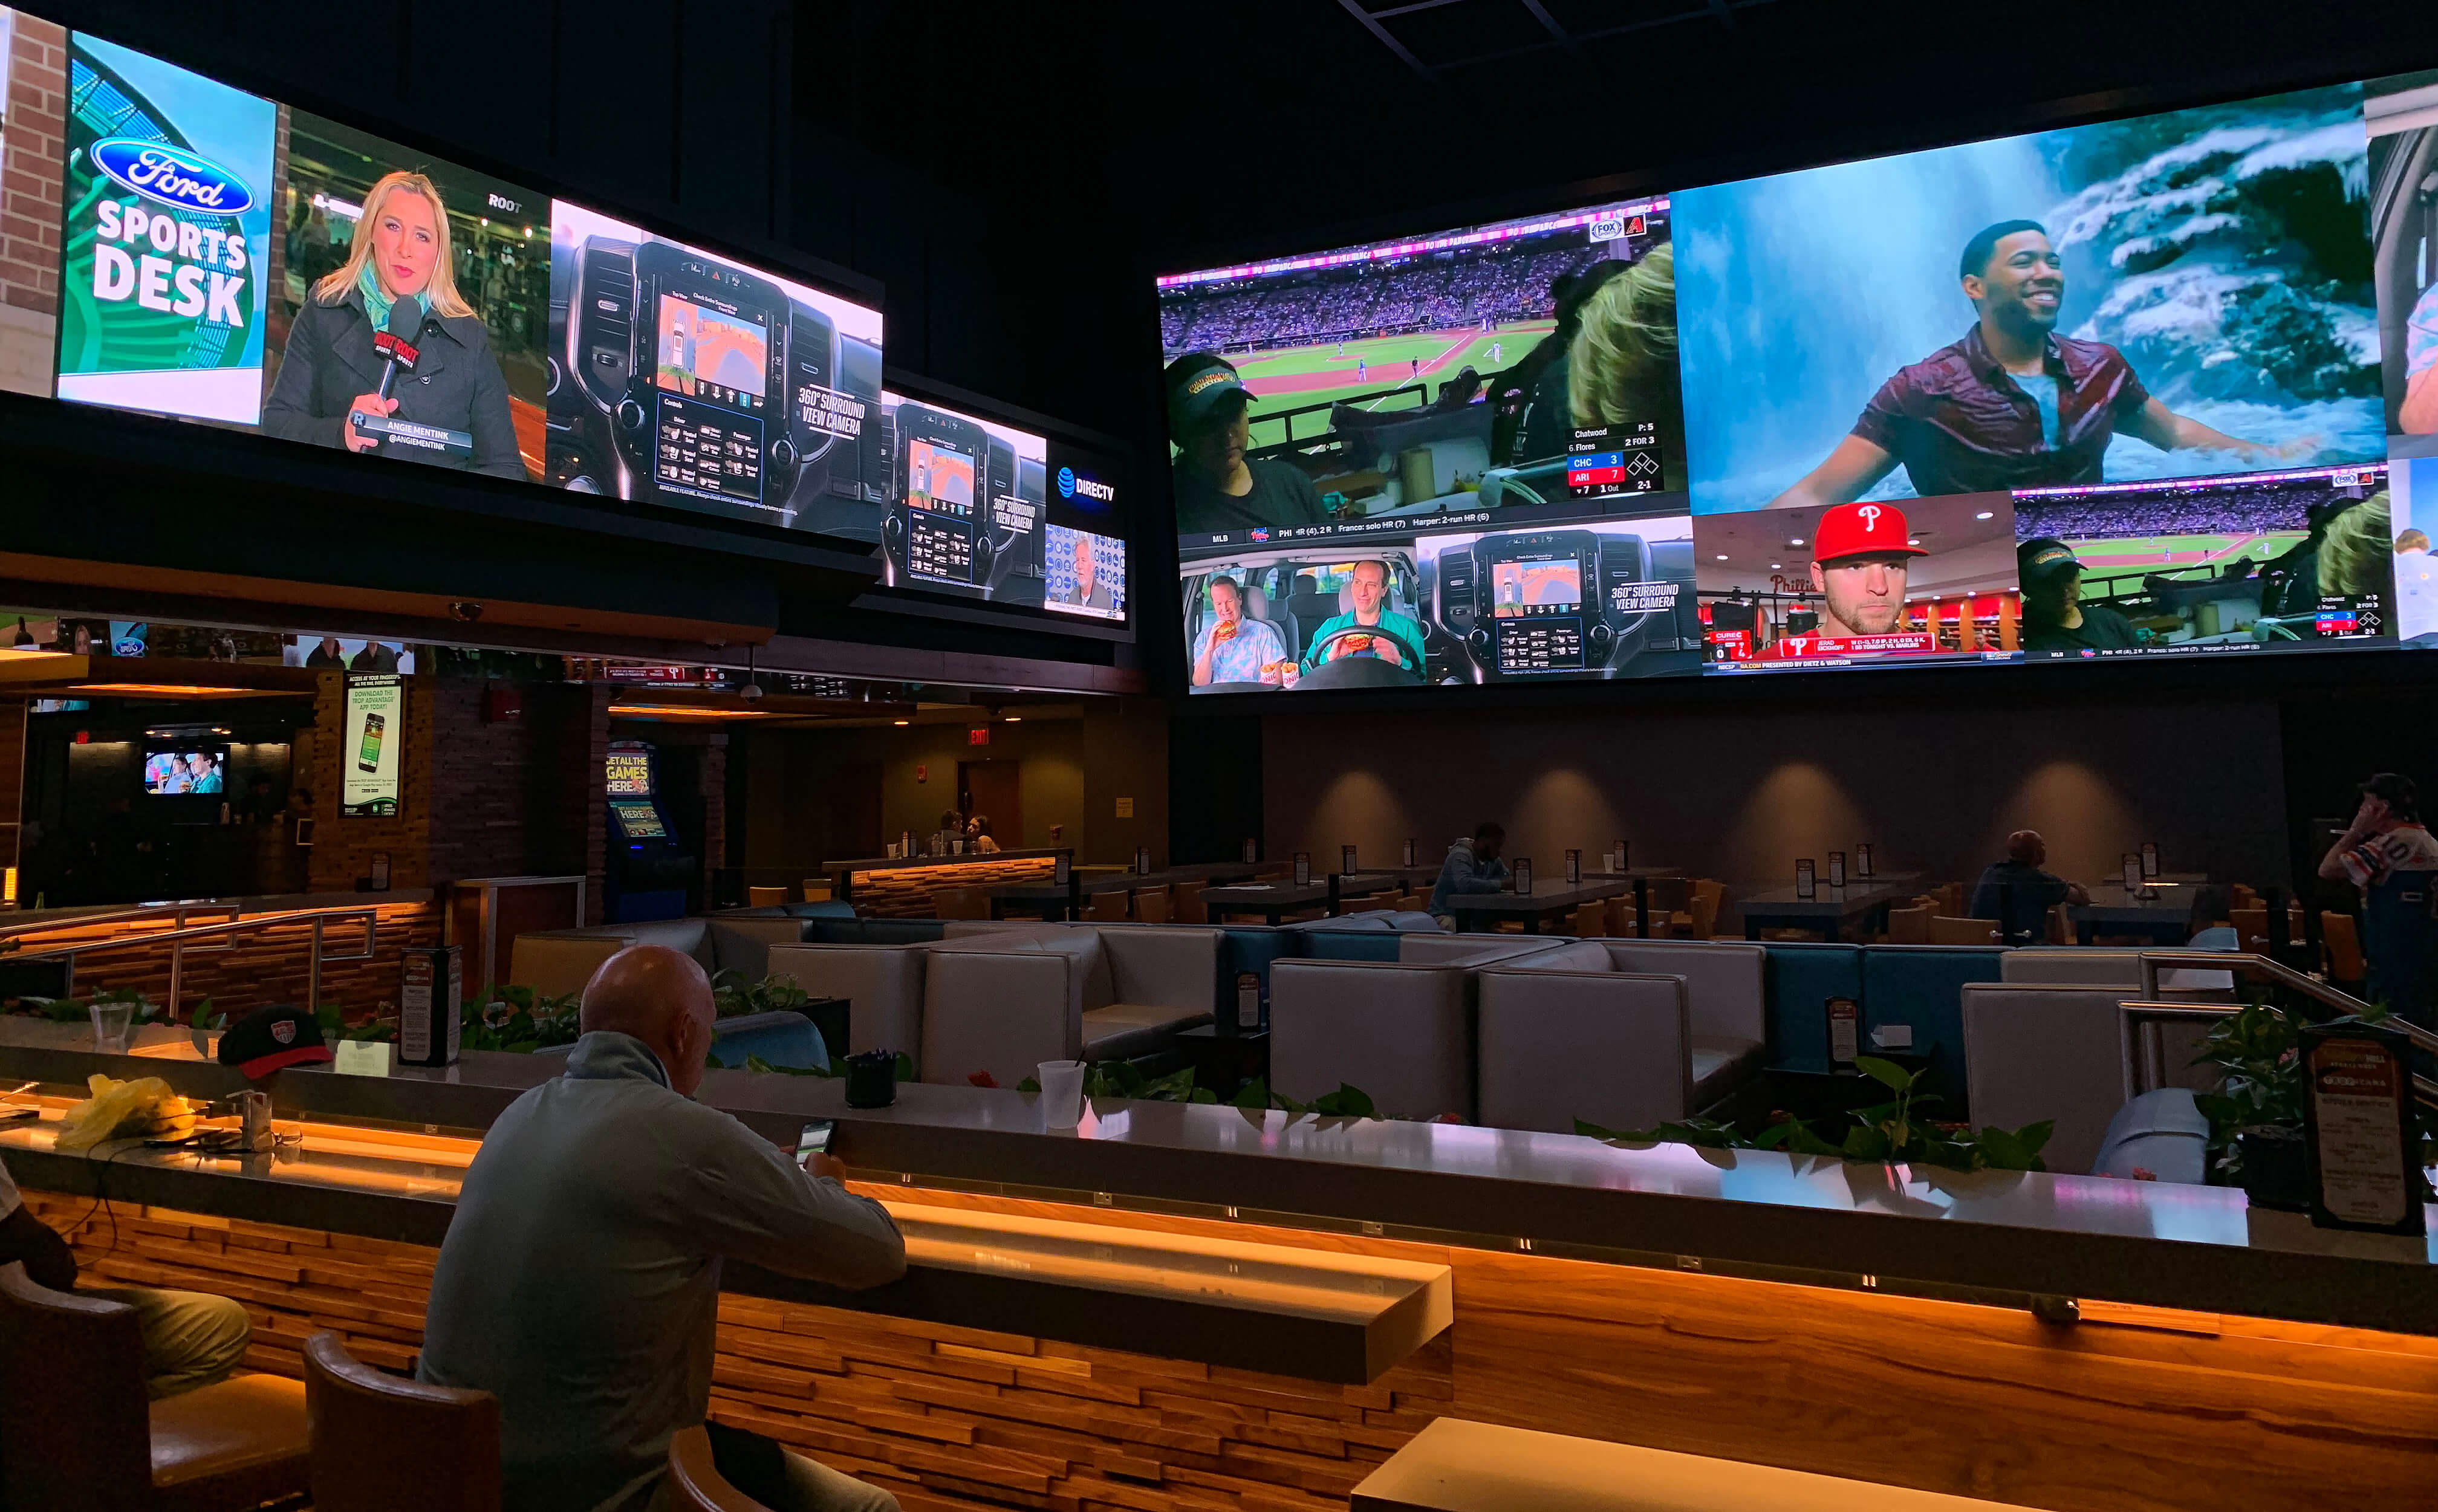 The wrap-around screens at the William Hill Sportsbook at Tropicana Atlantic City